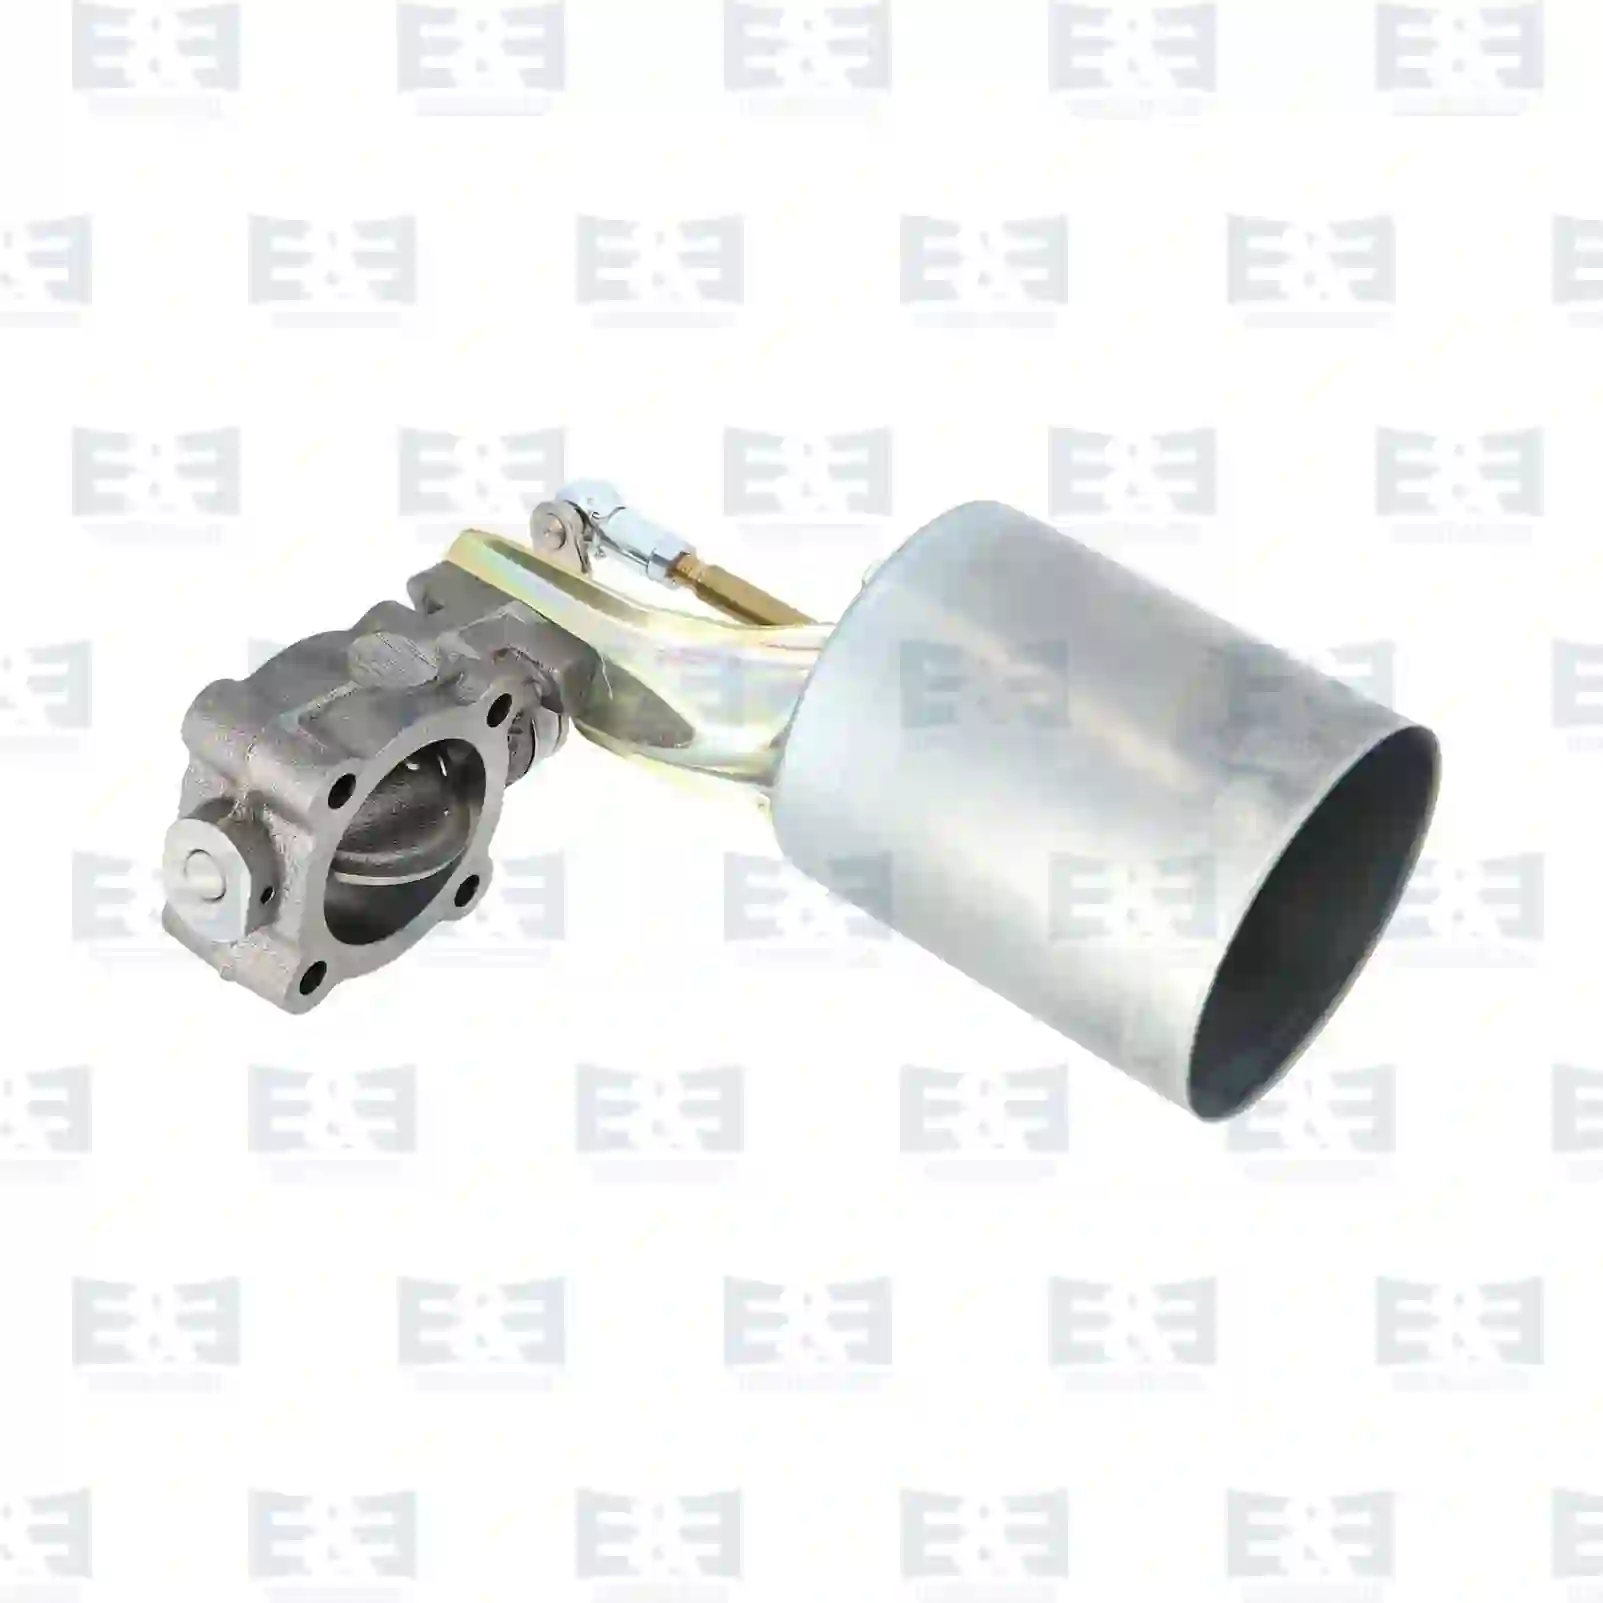 Exhaust brake, complete with cylinder, 2E2208775, 9014900104S1, 9014920192S1, 2D0131929 ||  2E2208775 E&E Truck Spare Parts | Truck Spare Parts, Auotomotive Spare Parts Exhaust brake, complete with cylinder, 2E2208775, 9014900104S1, 9014920192S1, 2D0131929 ||  2E2208775 E&E Truck Spare Parts | Truck Spare Parts, Auotomotive Spare Parts